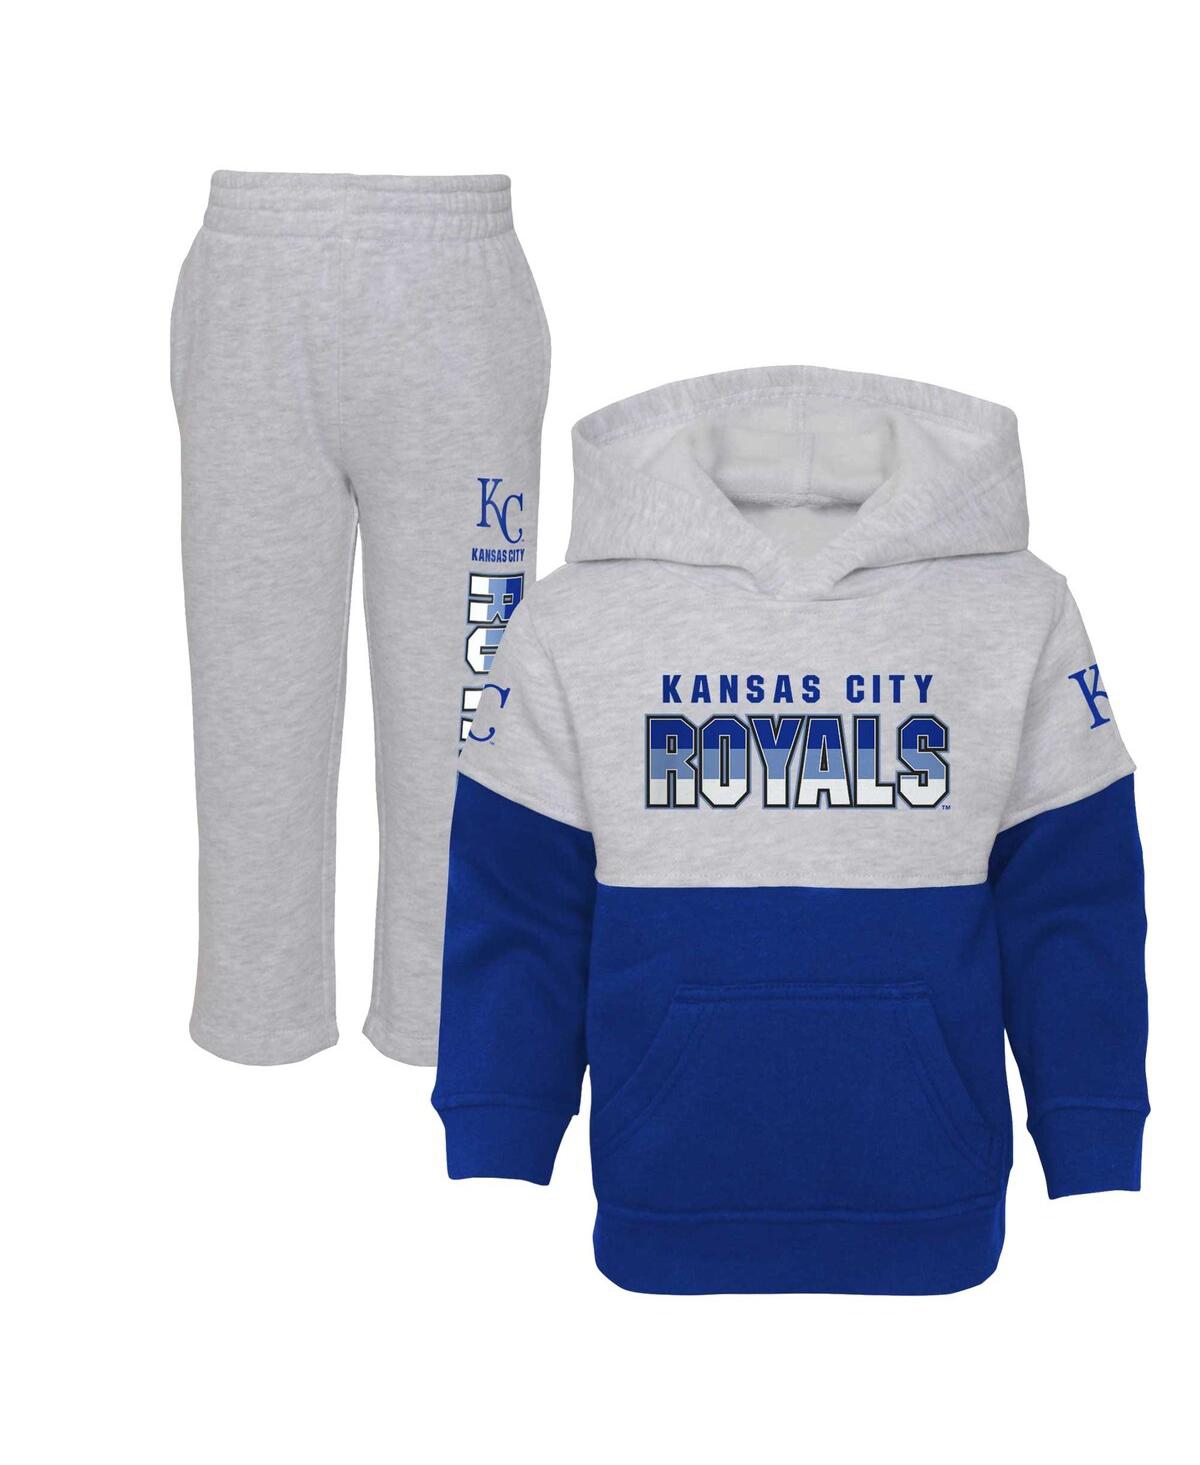 Outerstuff Babies' Toddler Boys And Girls Royal, Heather Gray Kansas City Royals Two-piece Playmaker Set In Royal,heather Gray